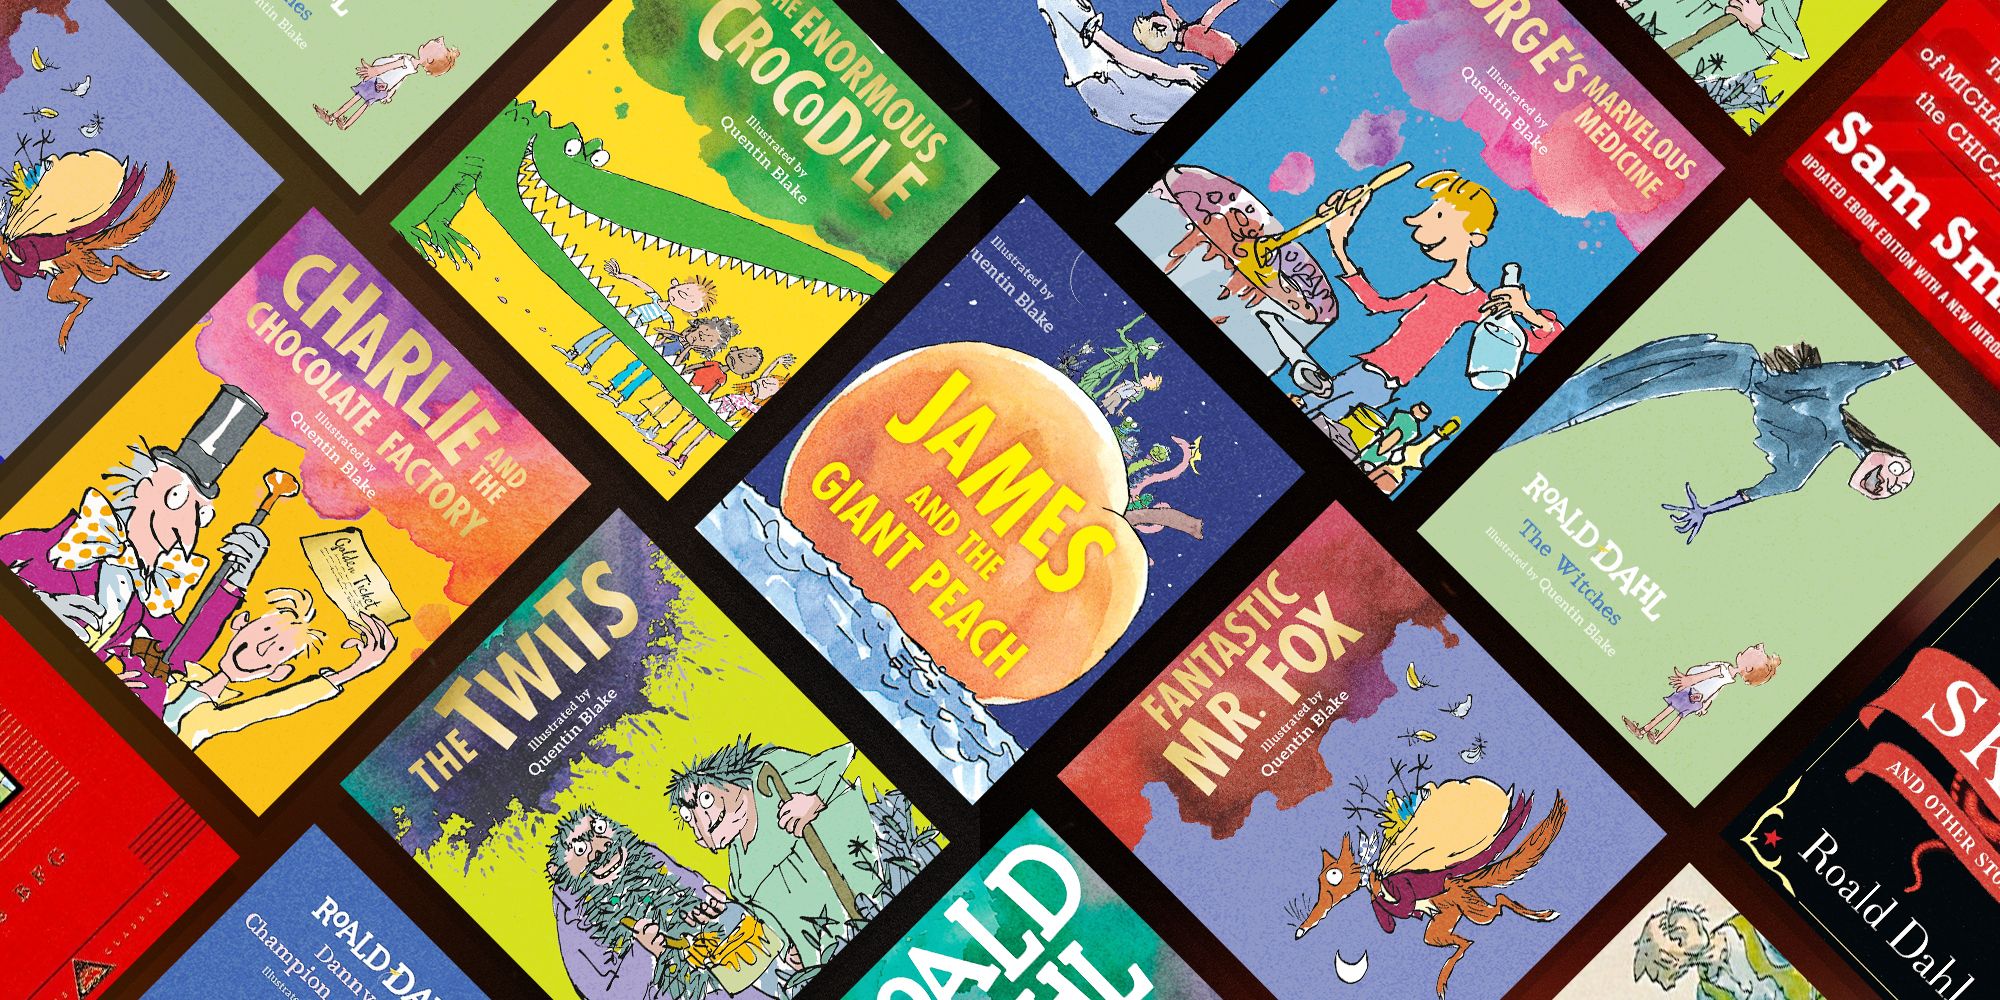 15 Best Roald Dahl Books for Kids and Adults